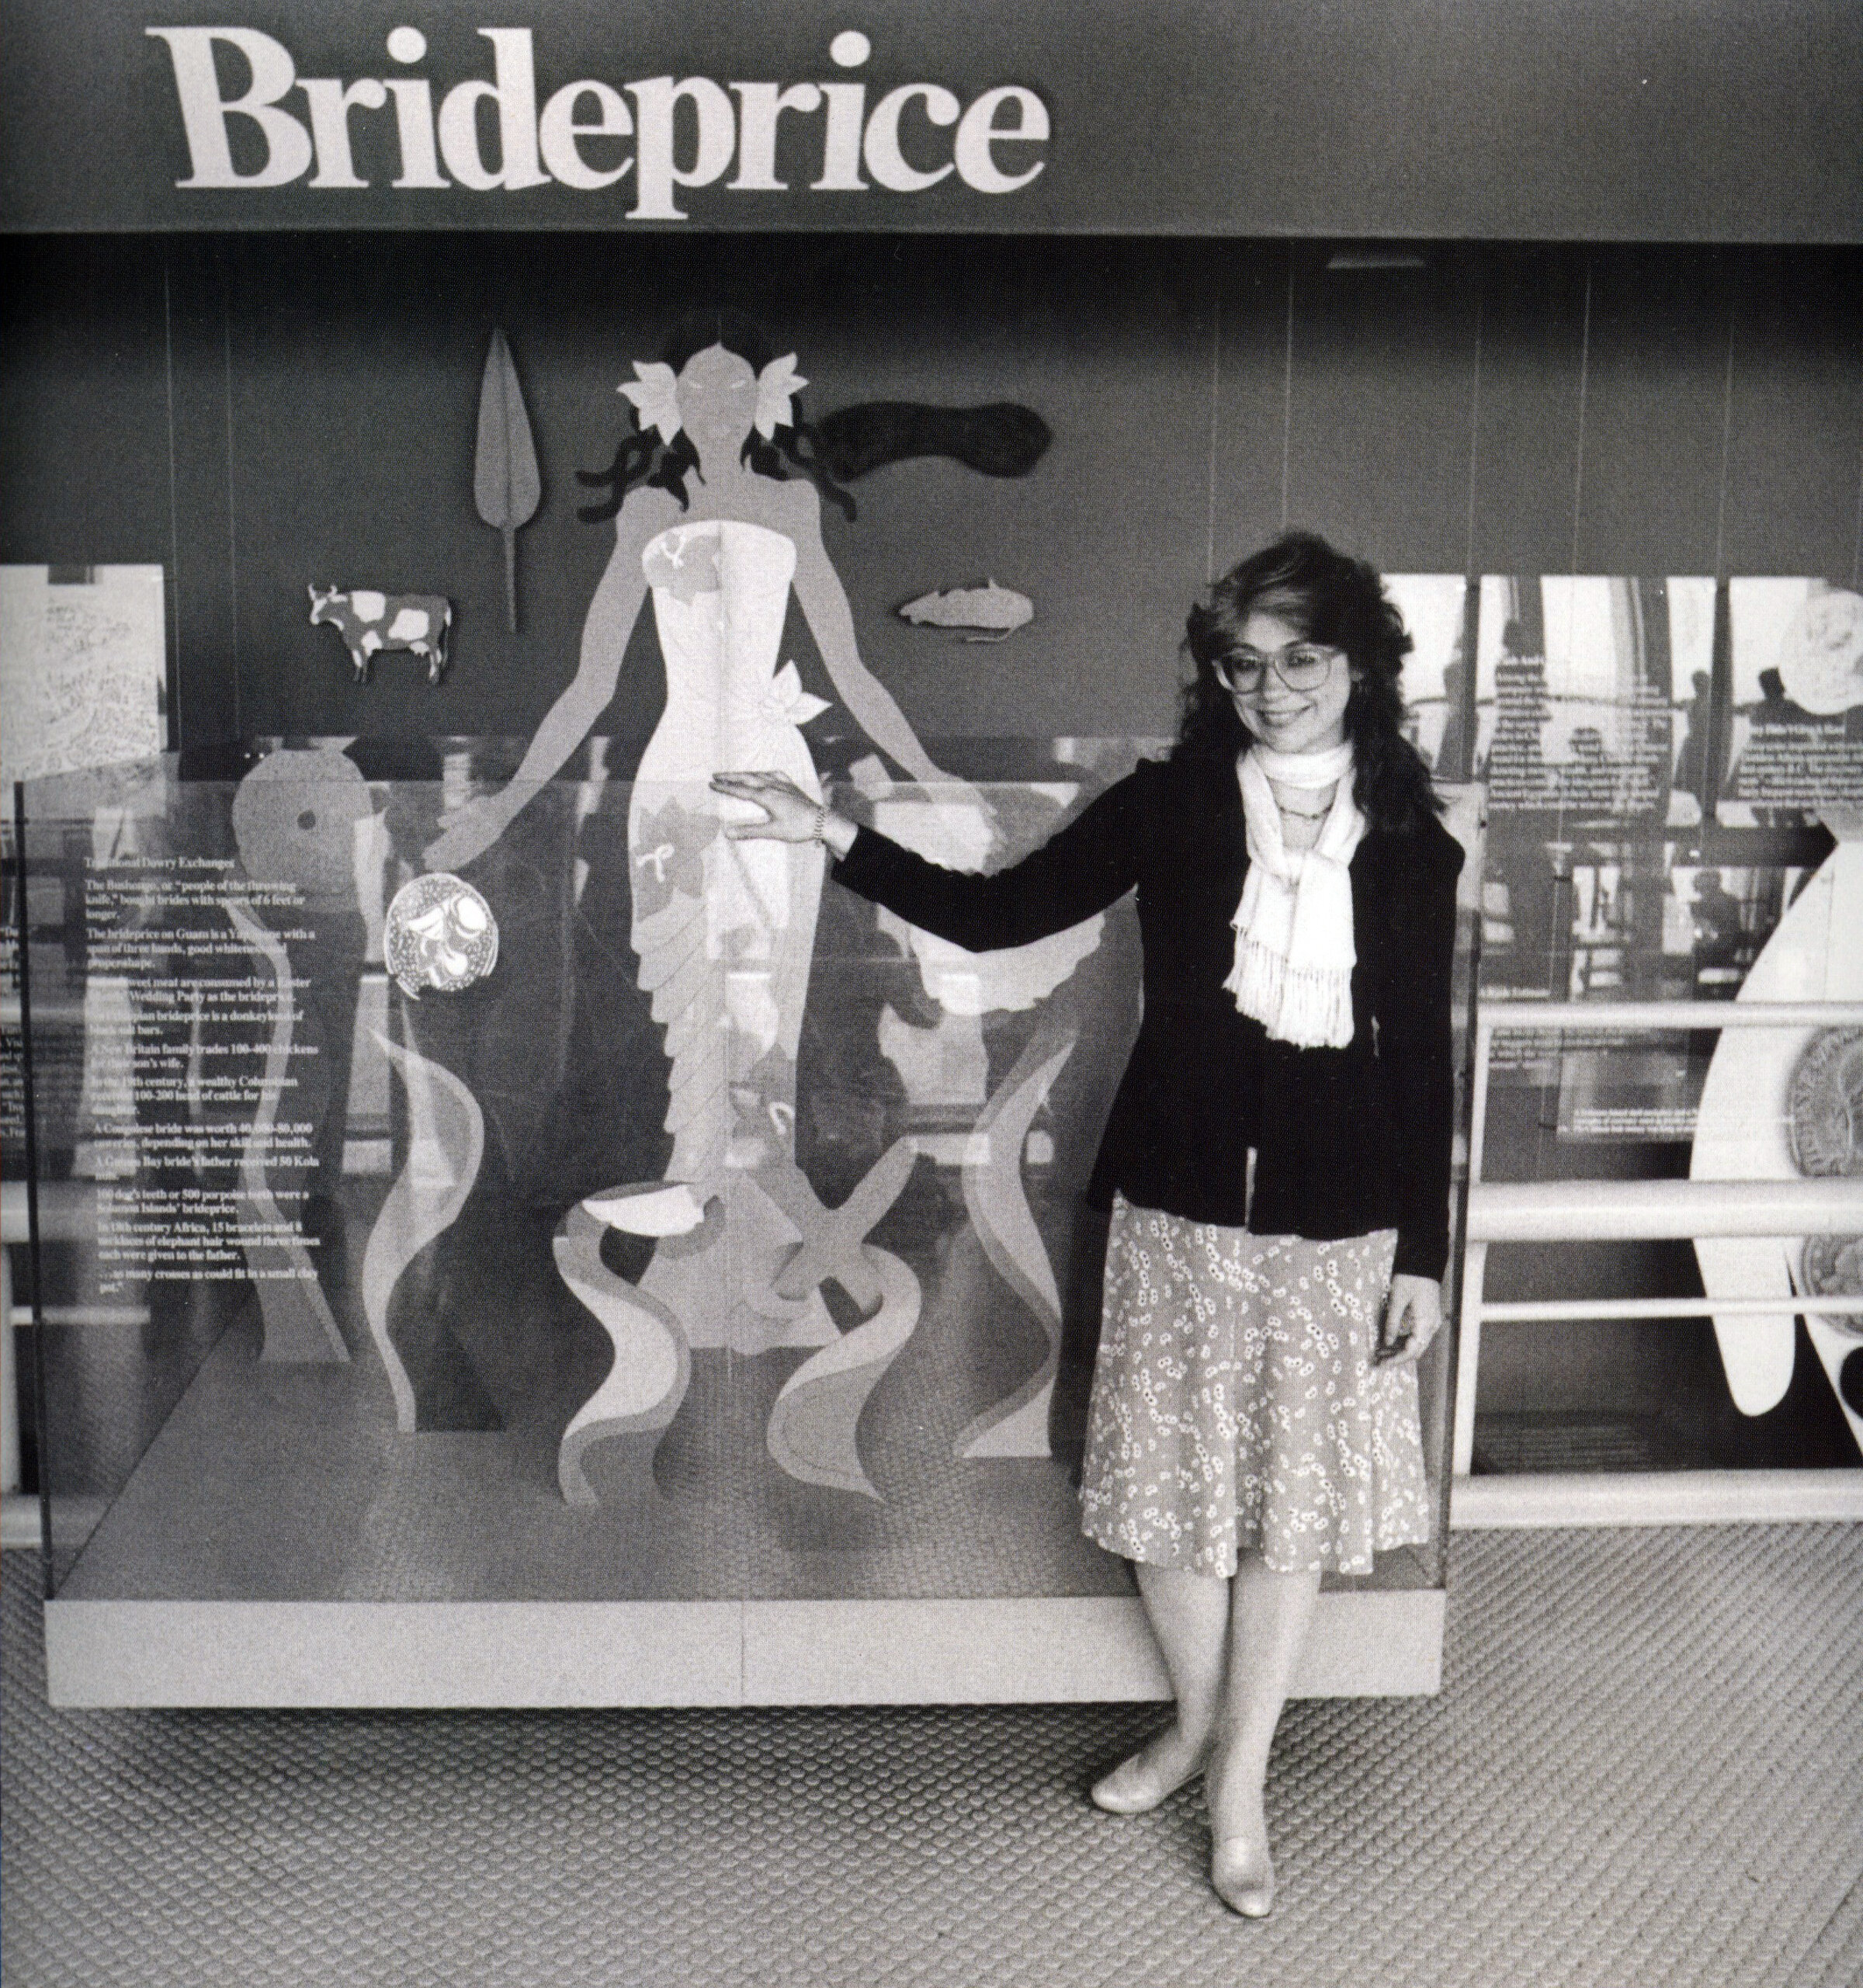 Barbara in front of her Brideprice installation at the World Trade Center, 1977